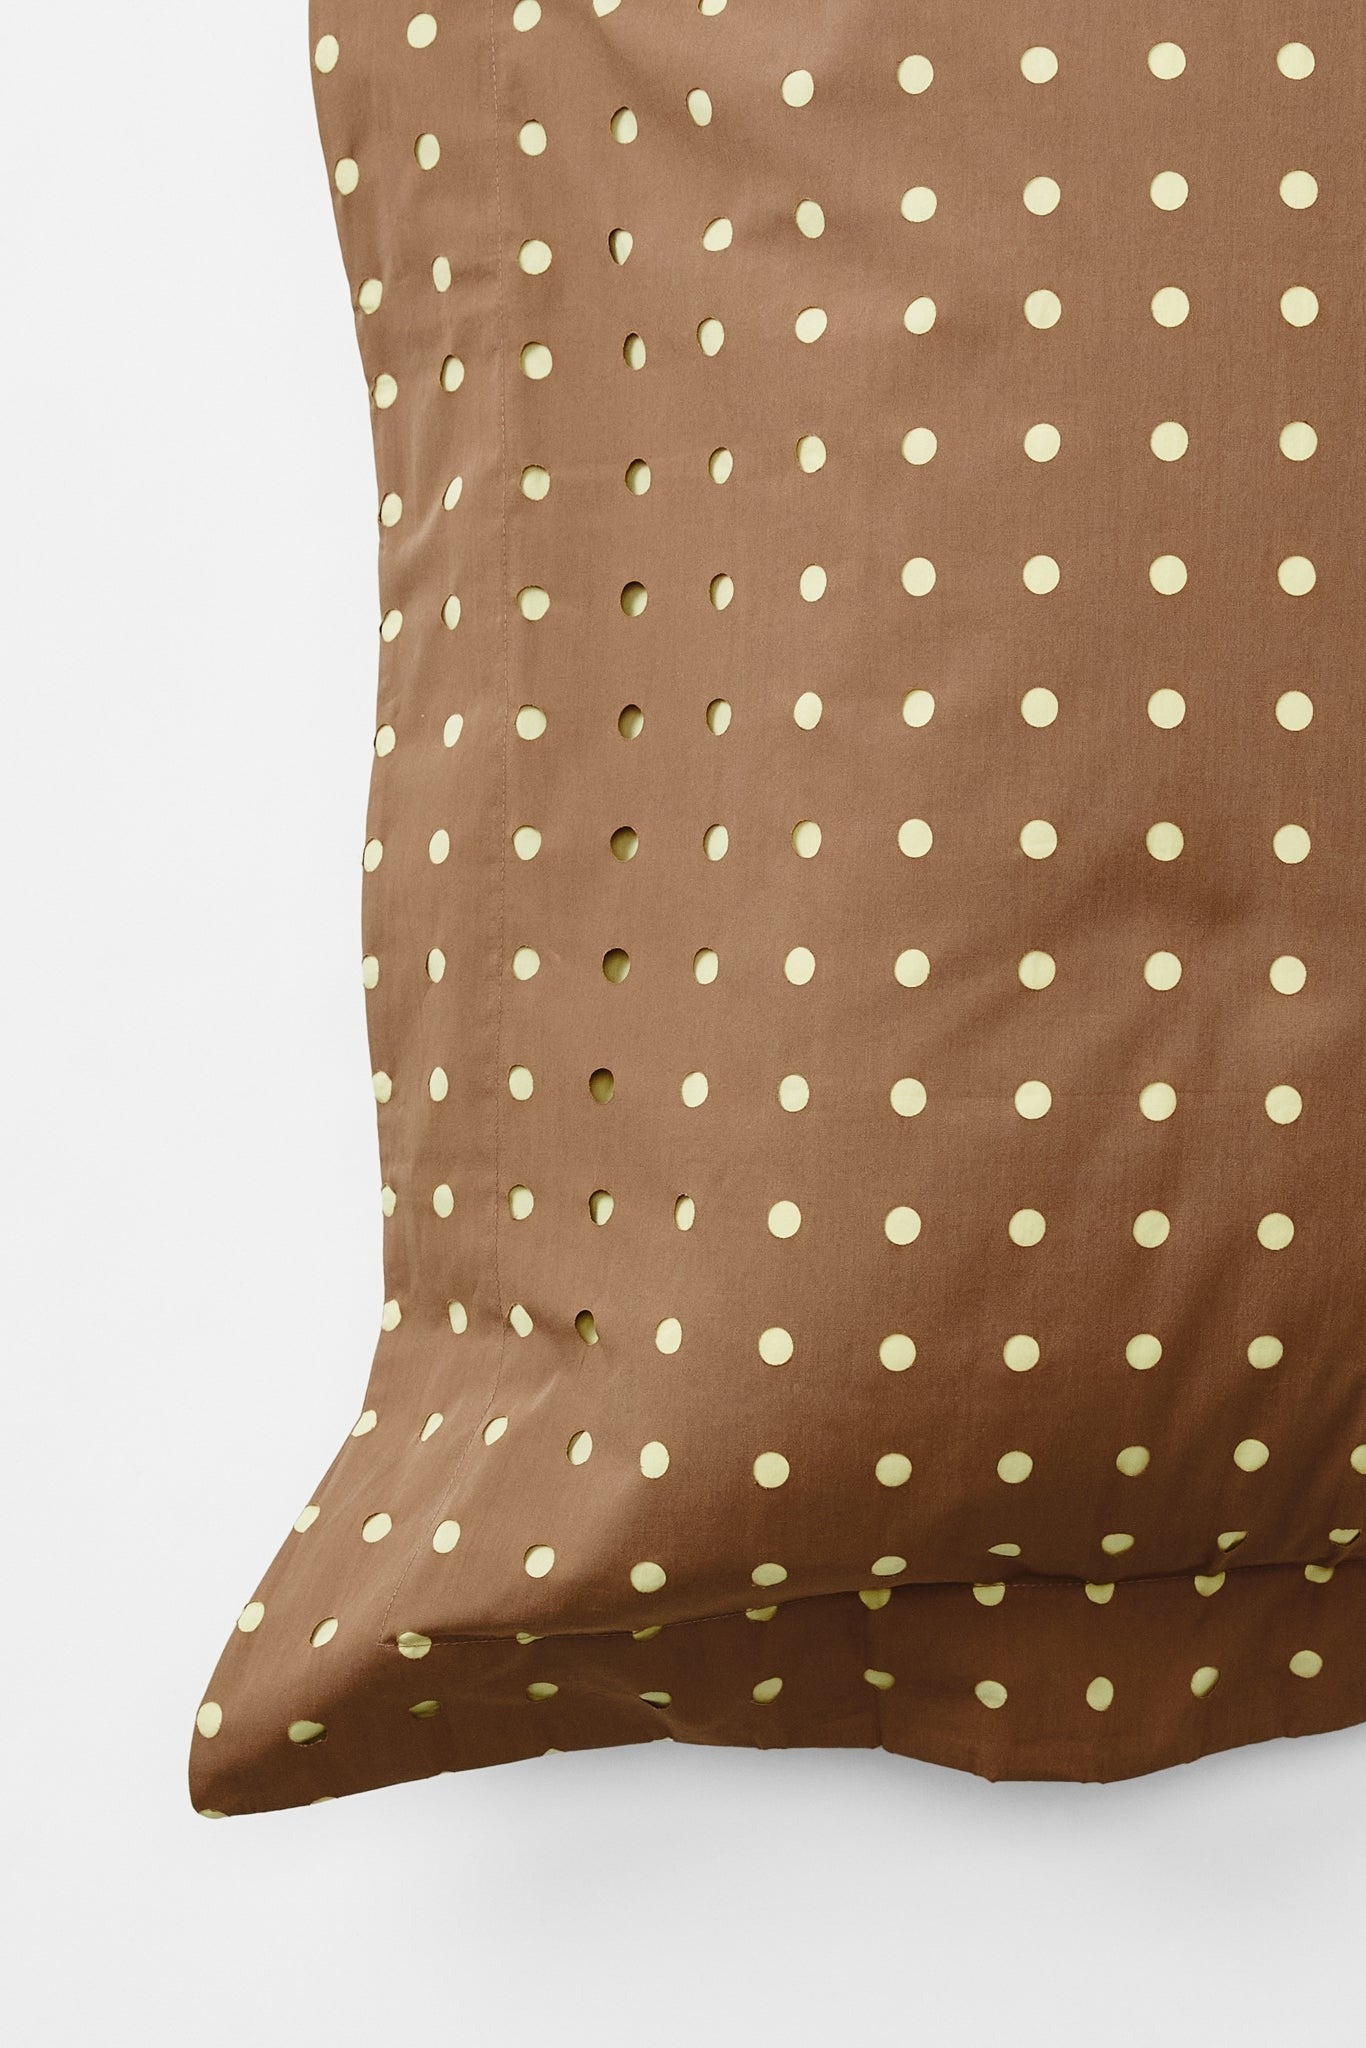 Punch Card Organic Cotton Percale Pillow Pair - Carob with Sulphur Pillows in Standard Pillow